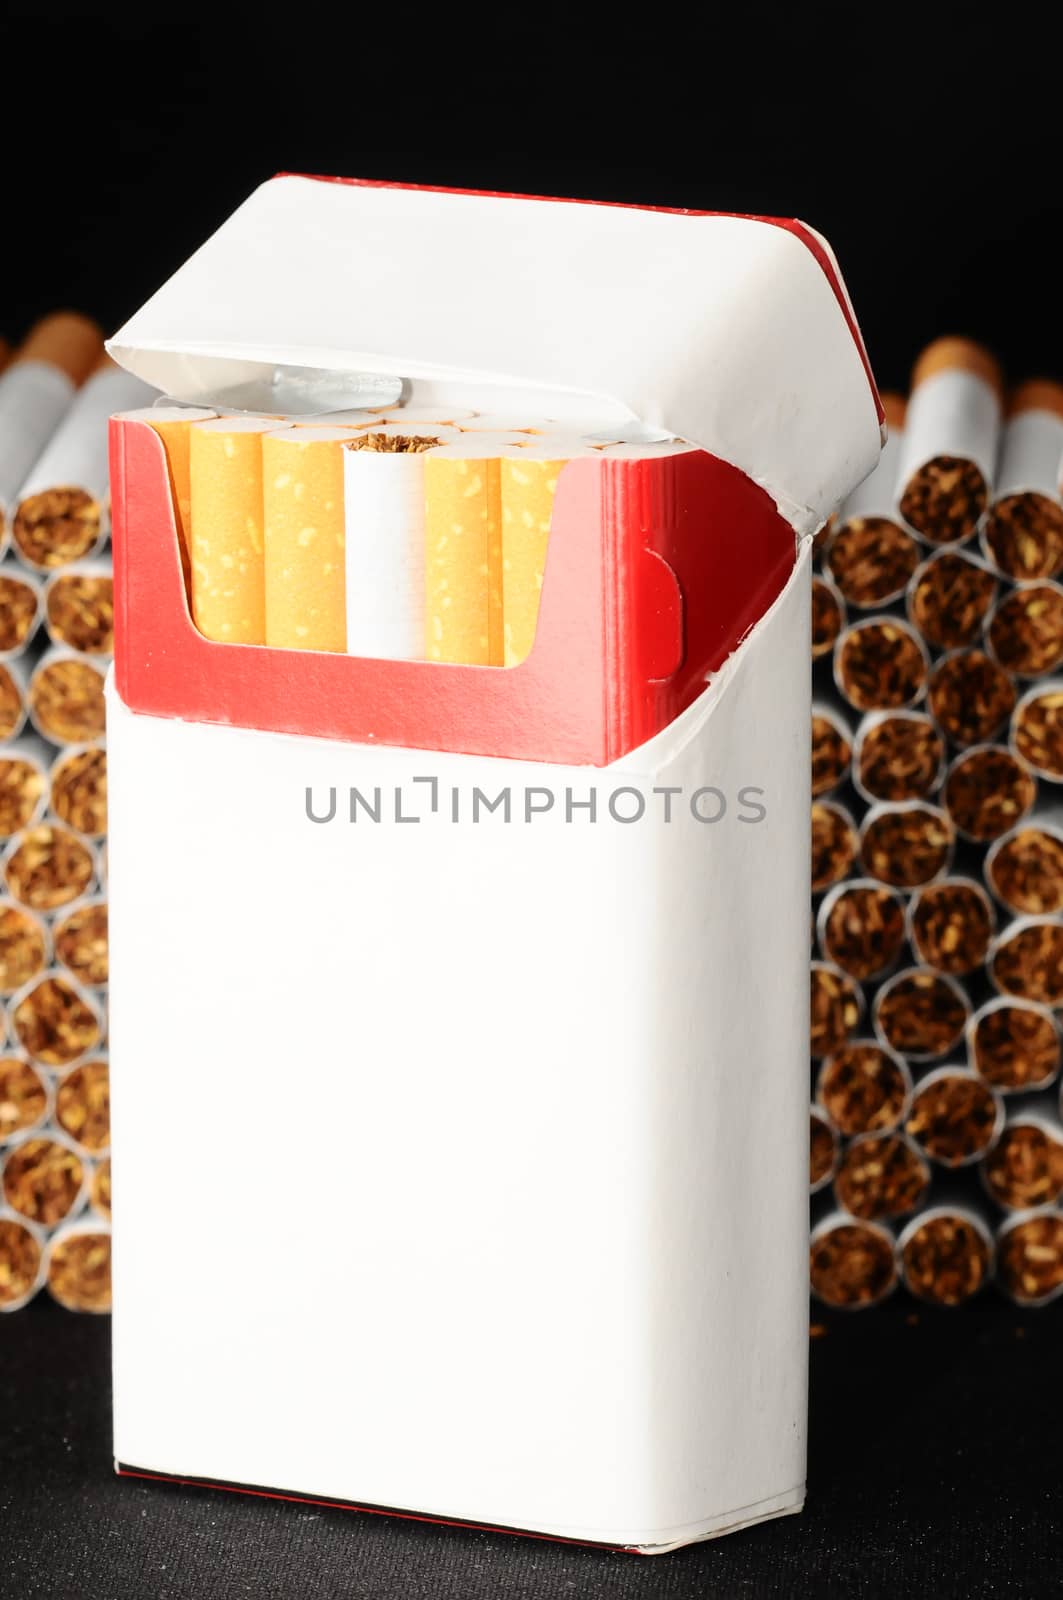 Close-up of Tobacco Cigarettes Background or texture